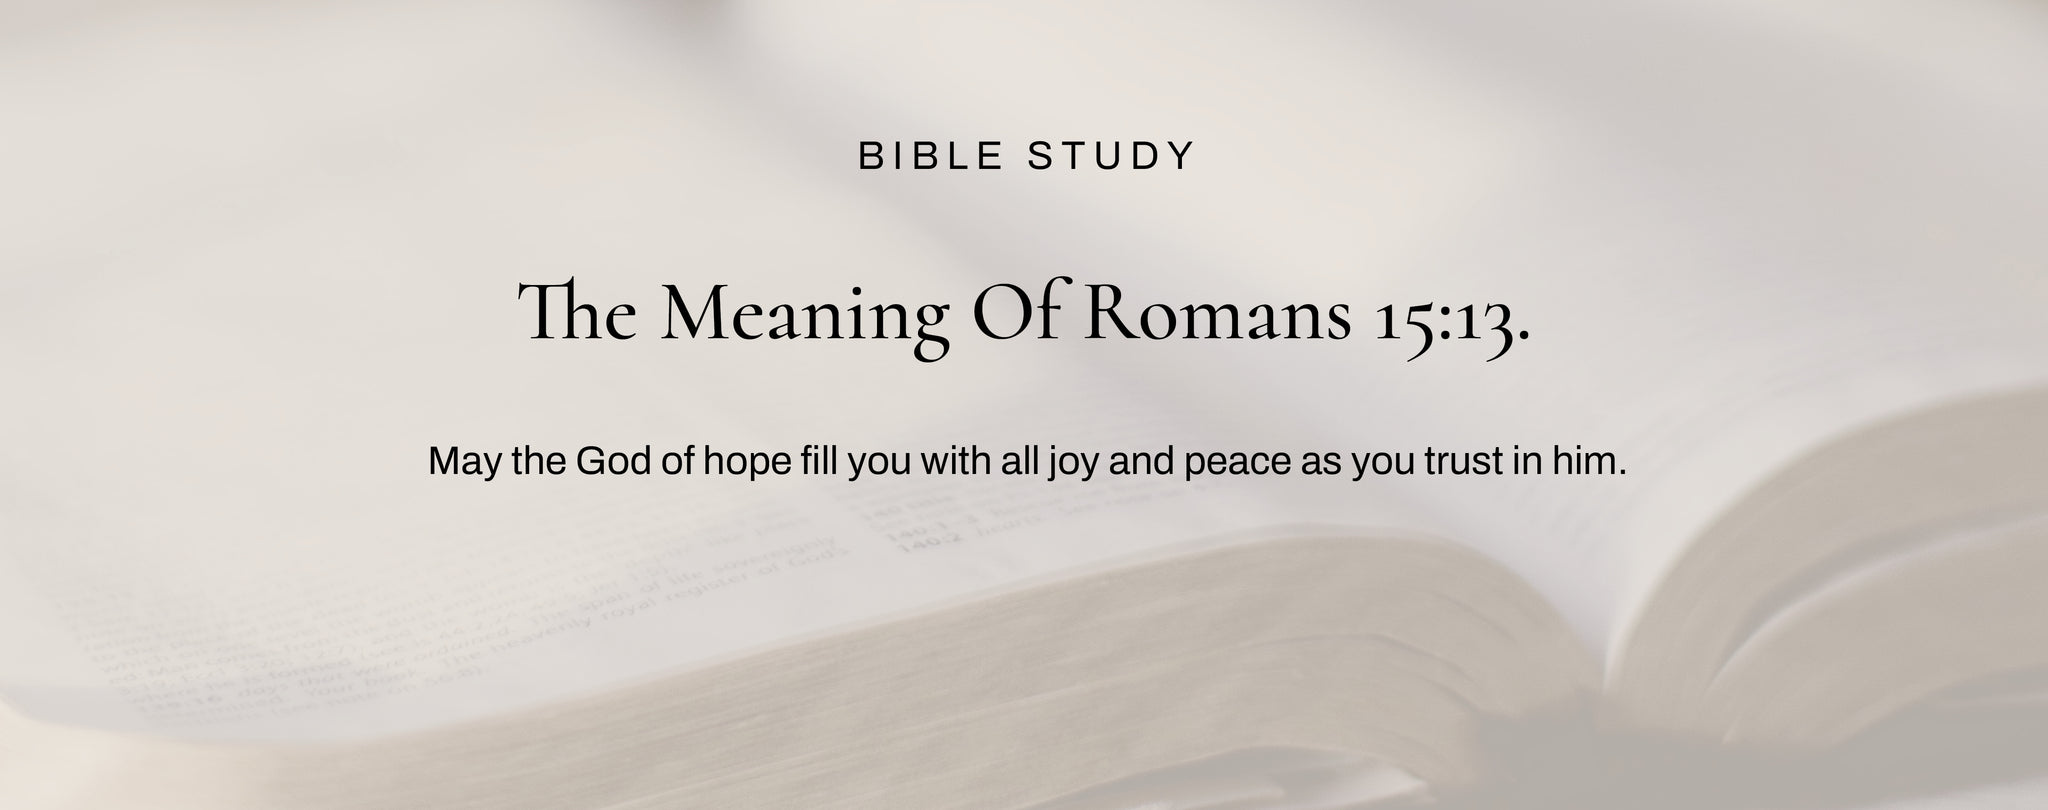 What Does Romans 15:13 Mean?